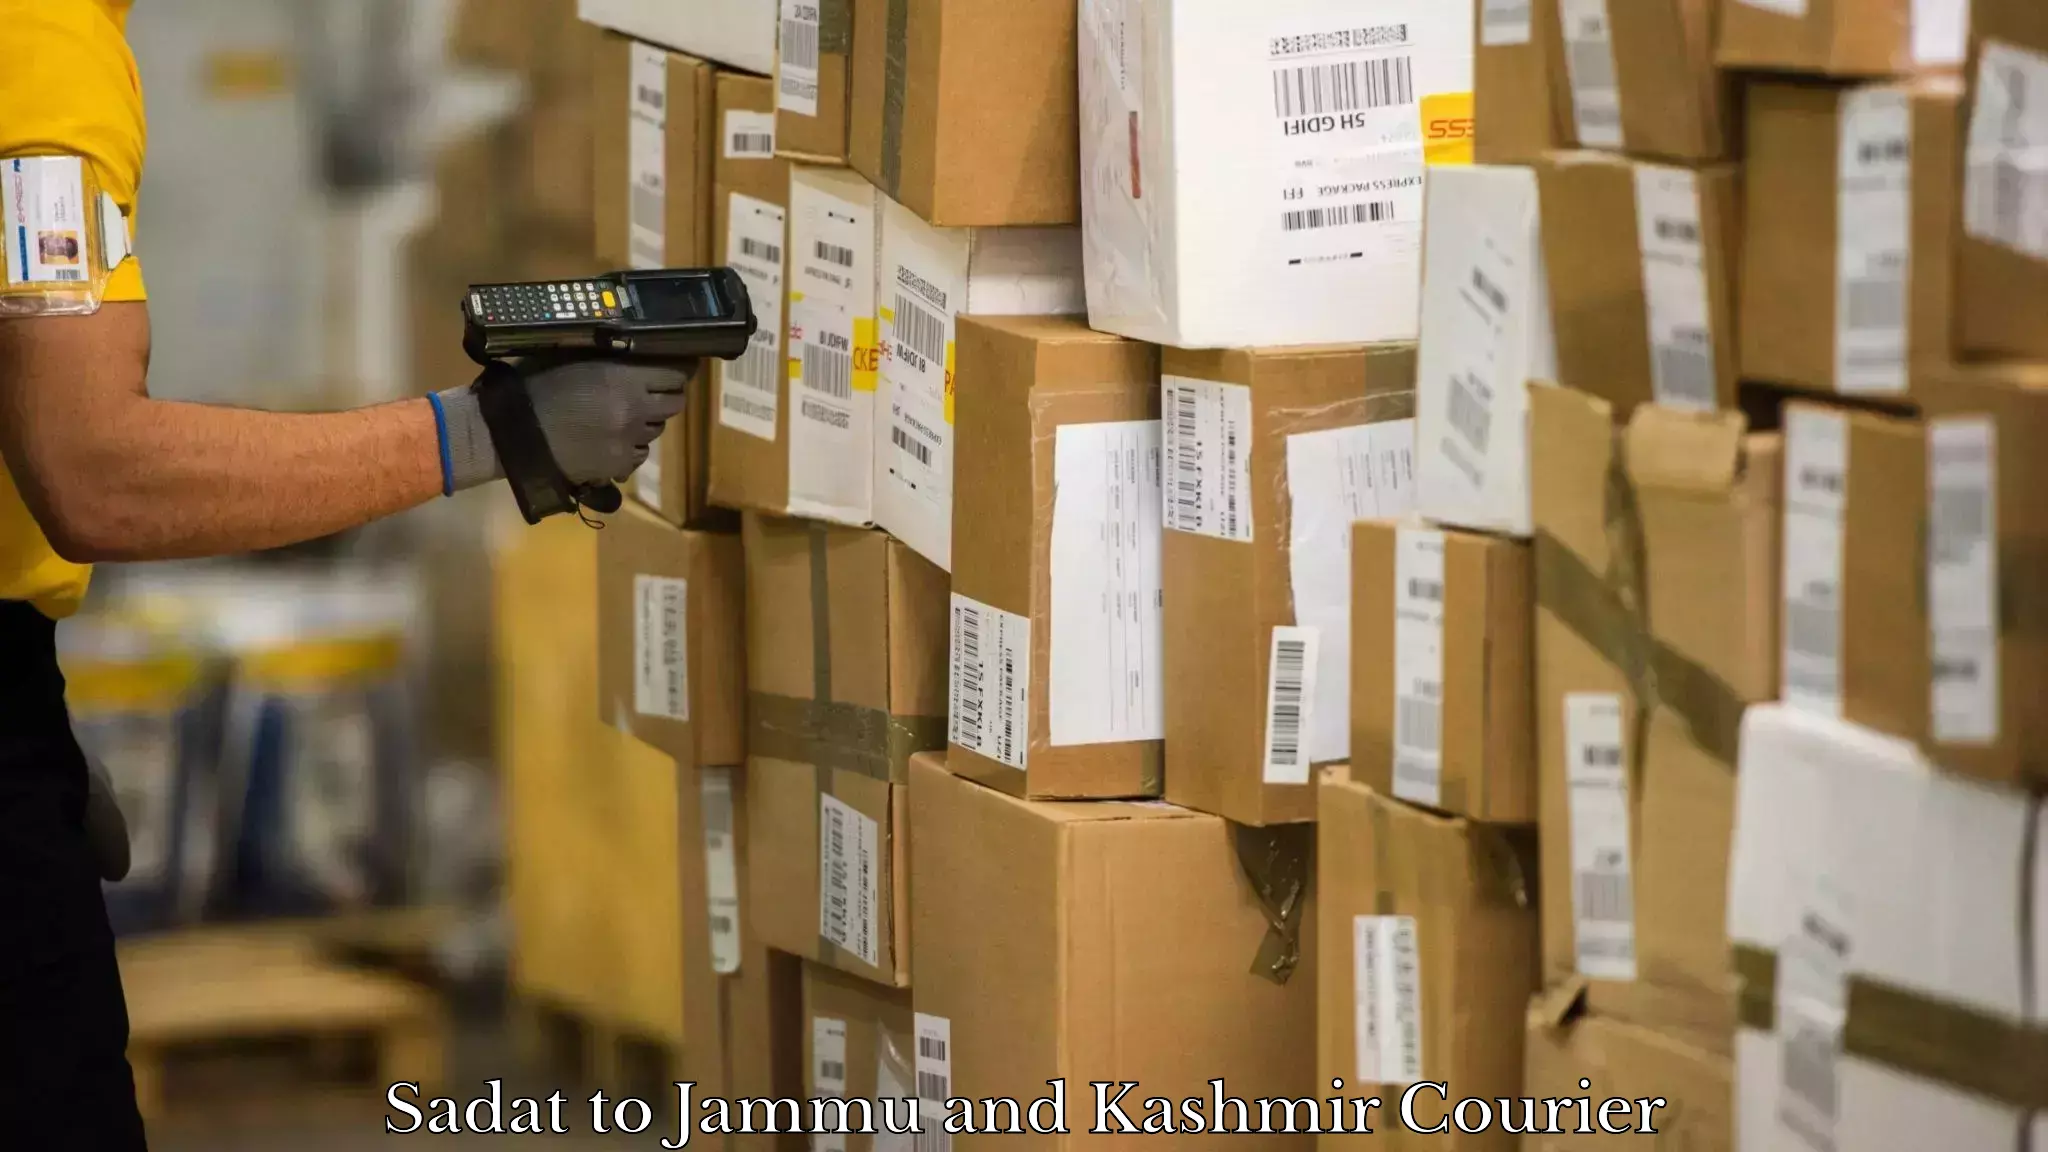 Reliable delivery network Sadat to Jammu and Kashmir